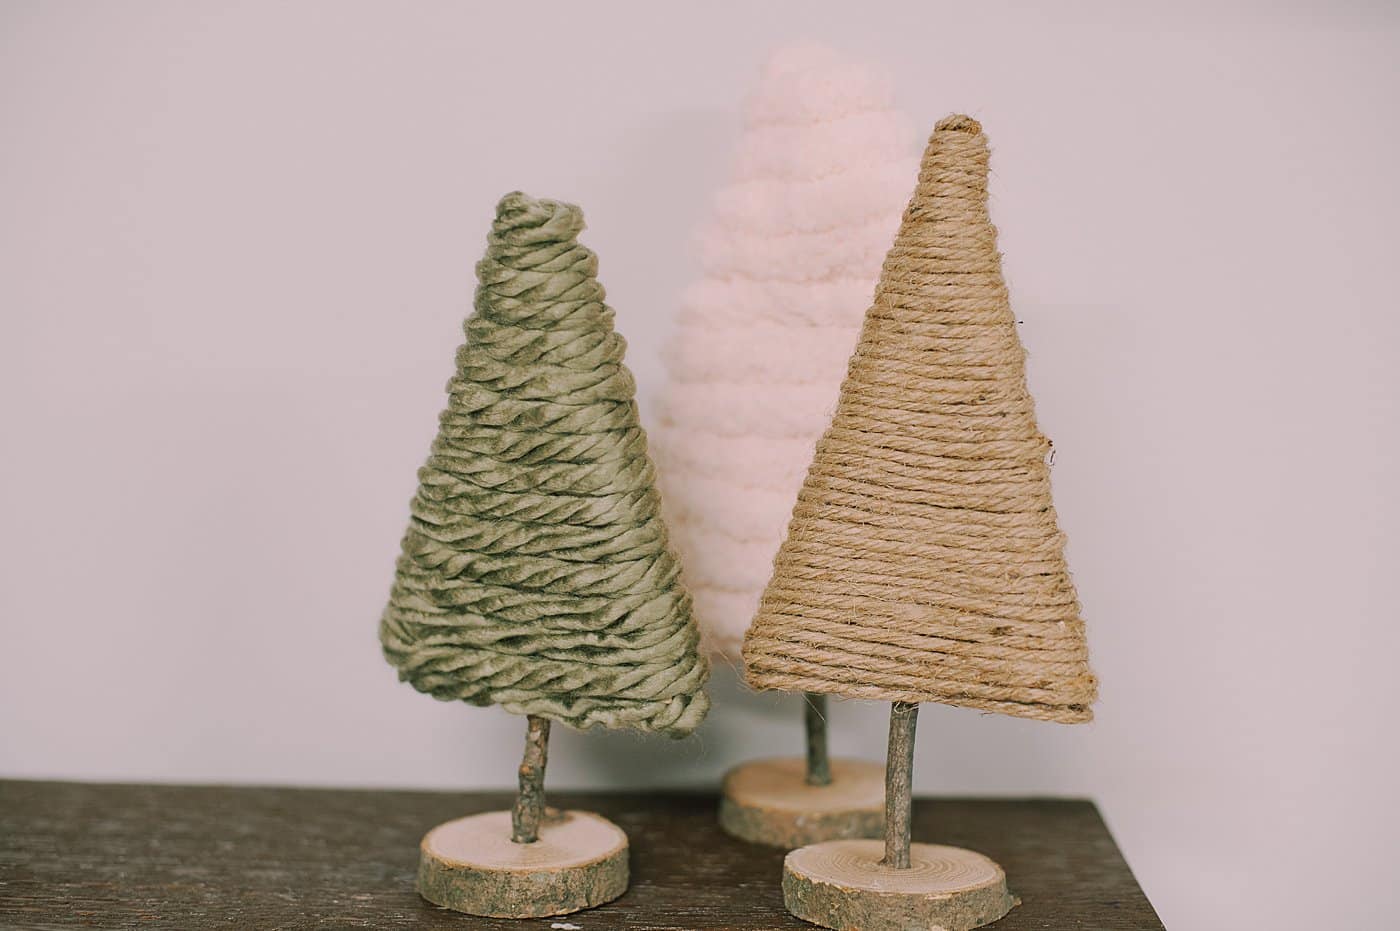 yarn trees made out of cardboard wrapped with different kinds of yarn or twine